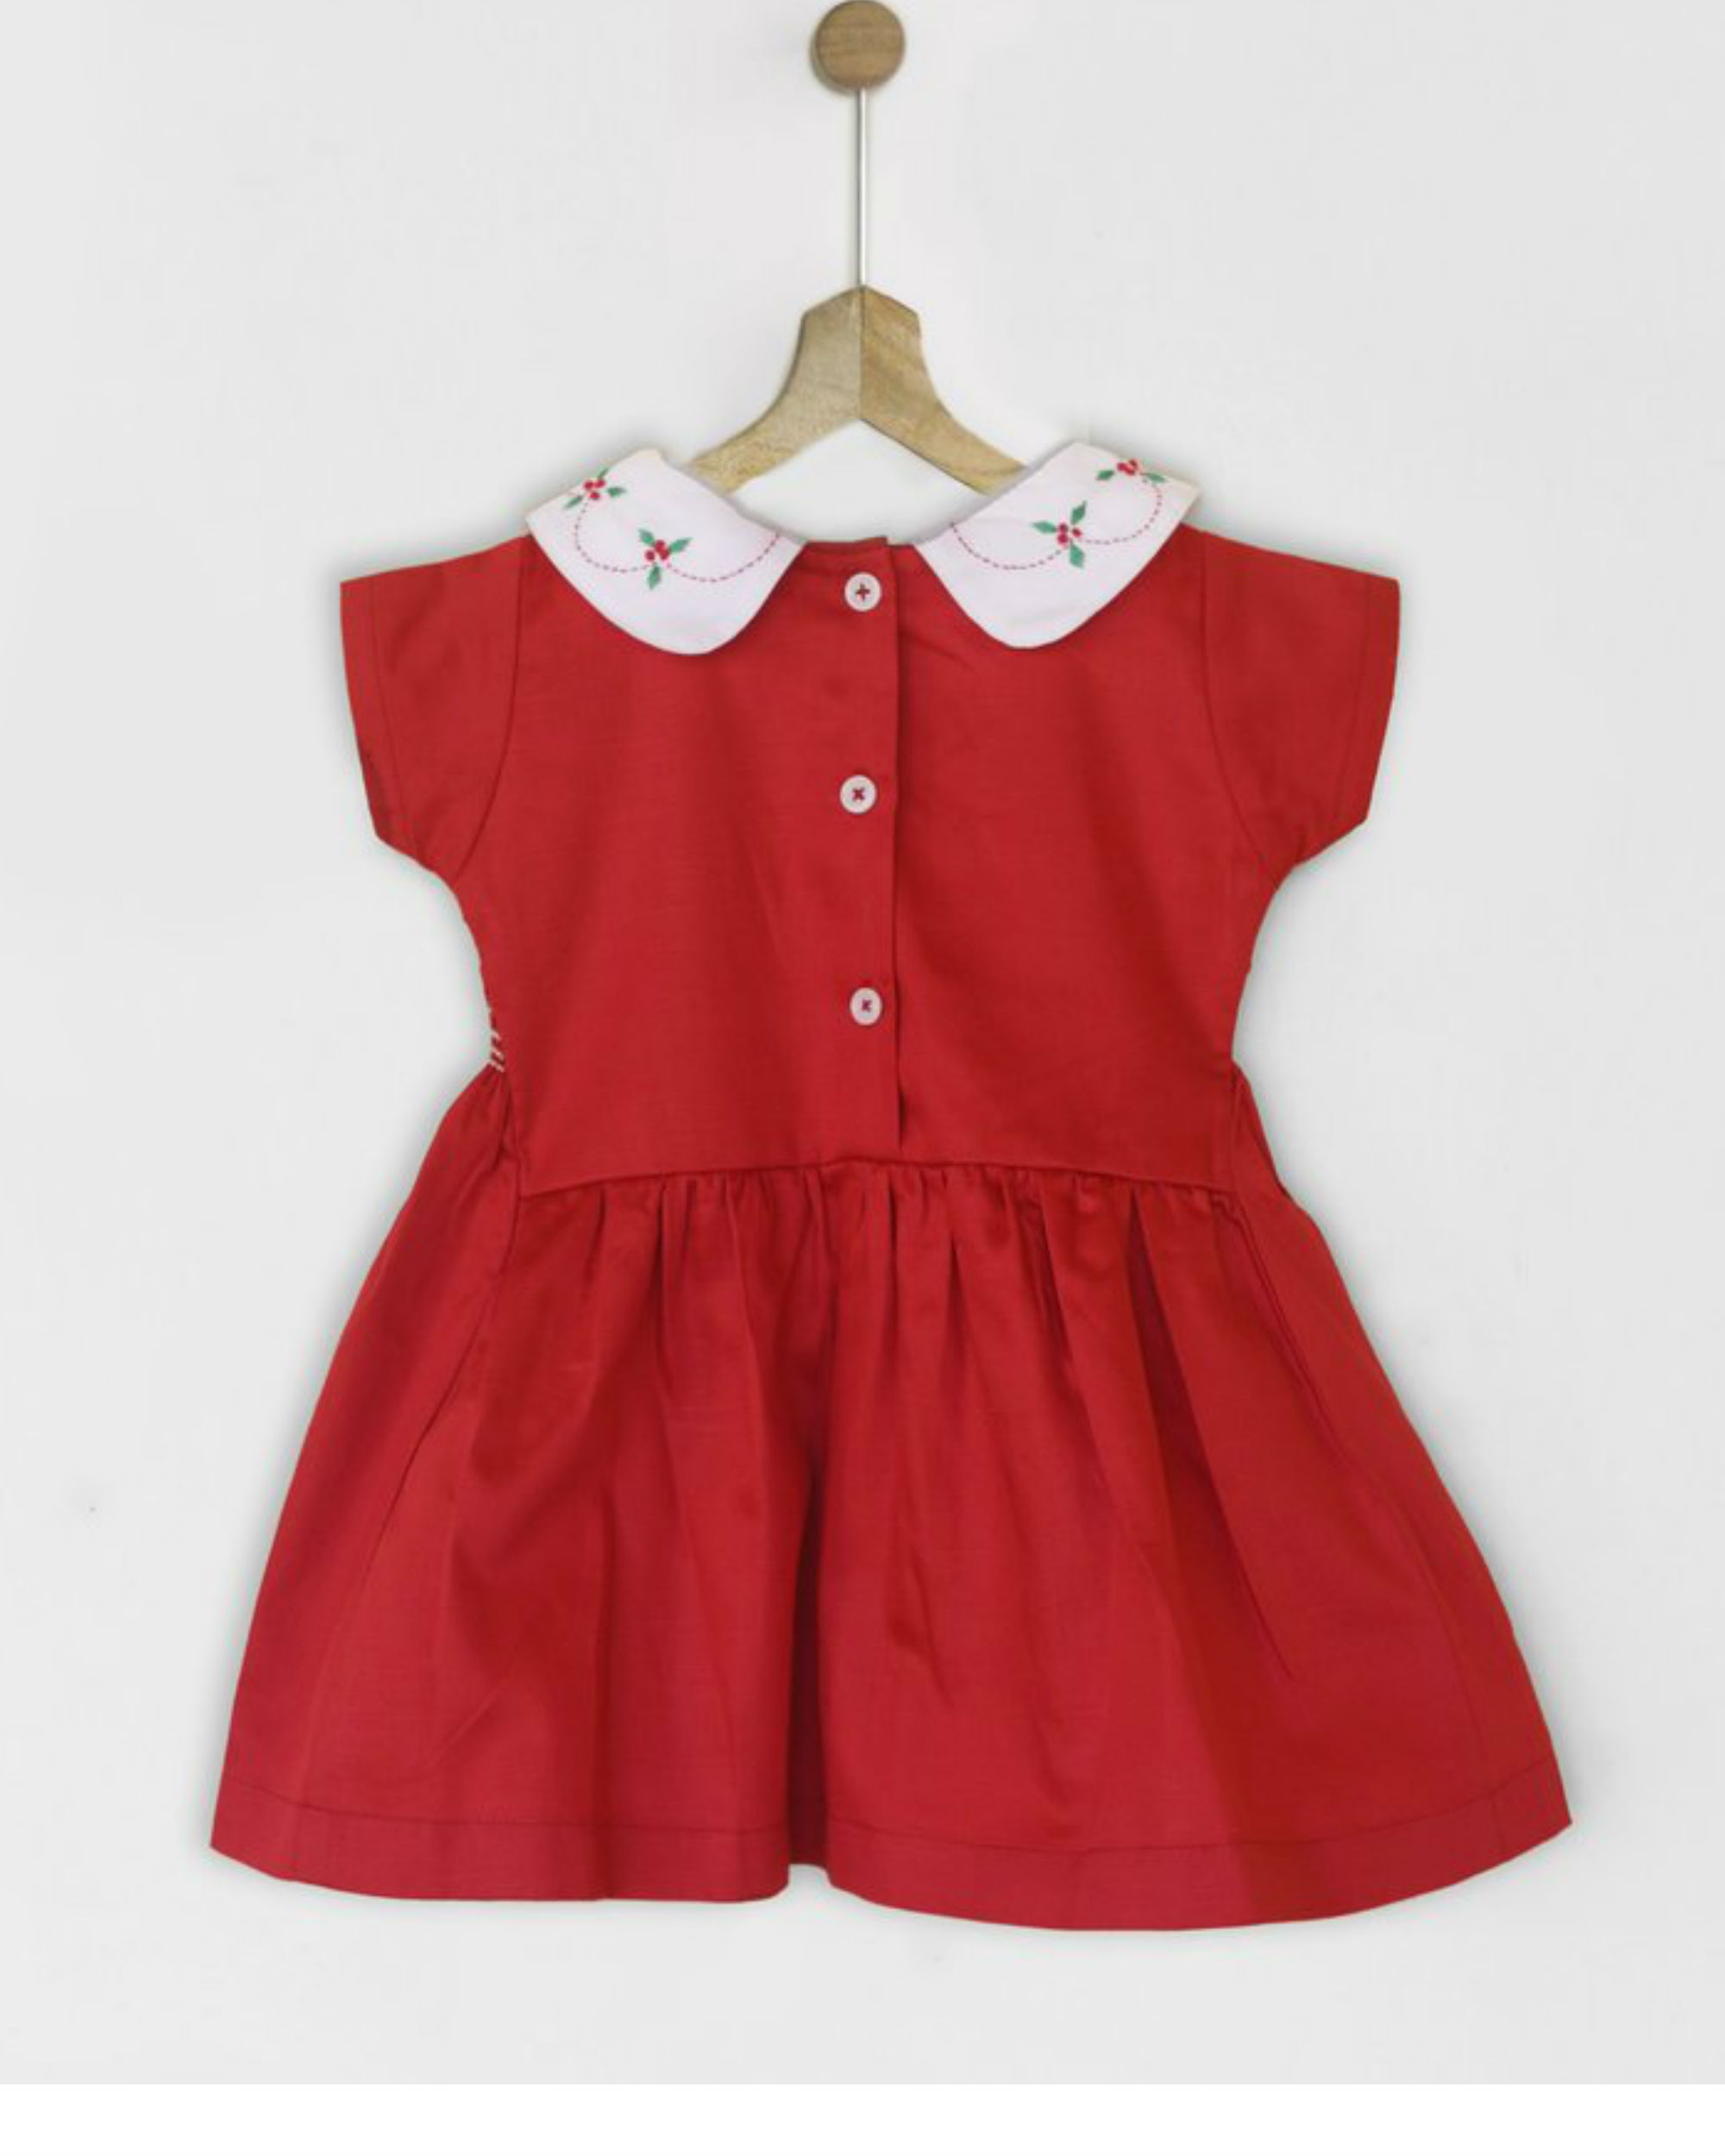 Red collared dress with smocking detail by Pluie Kids | The Secret Label